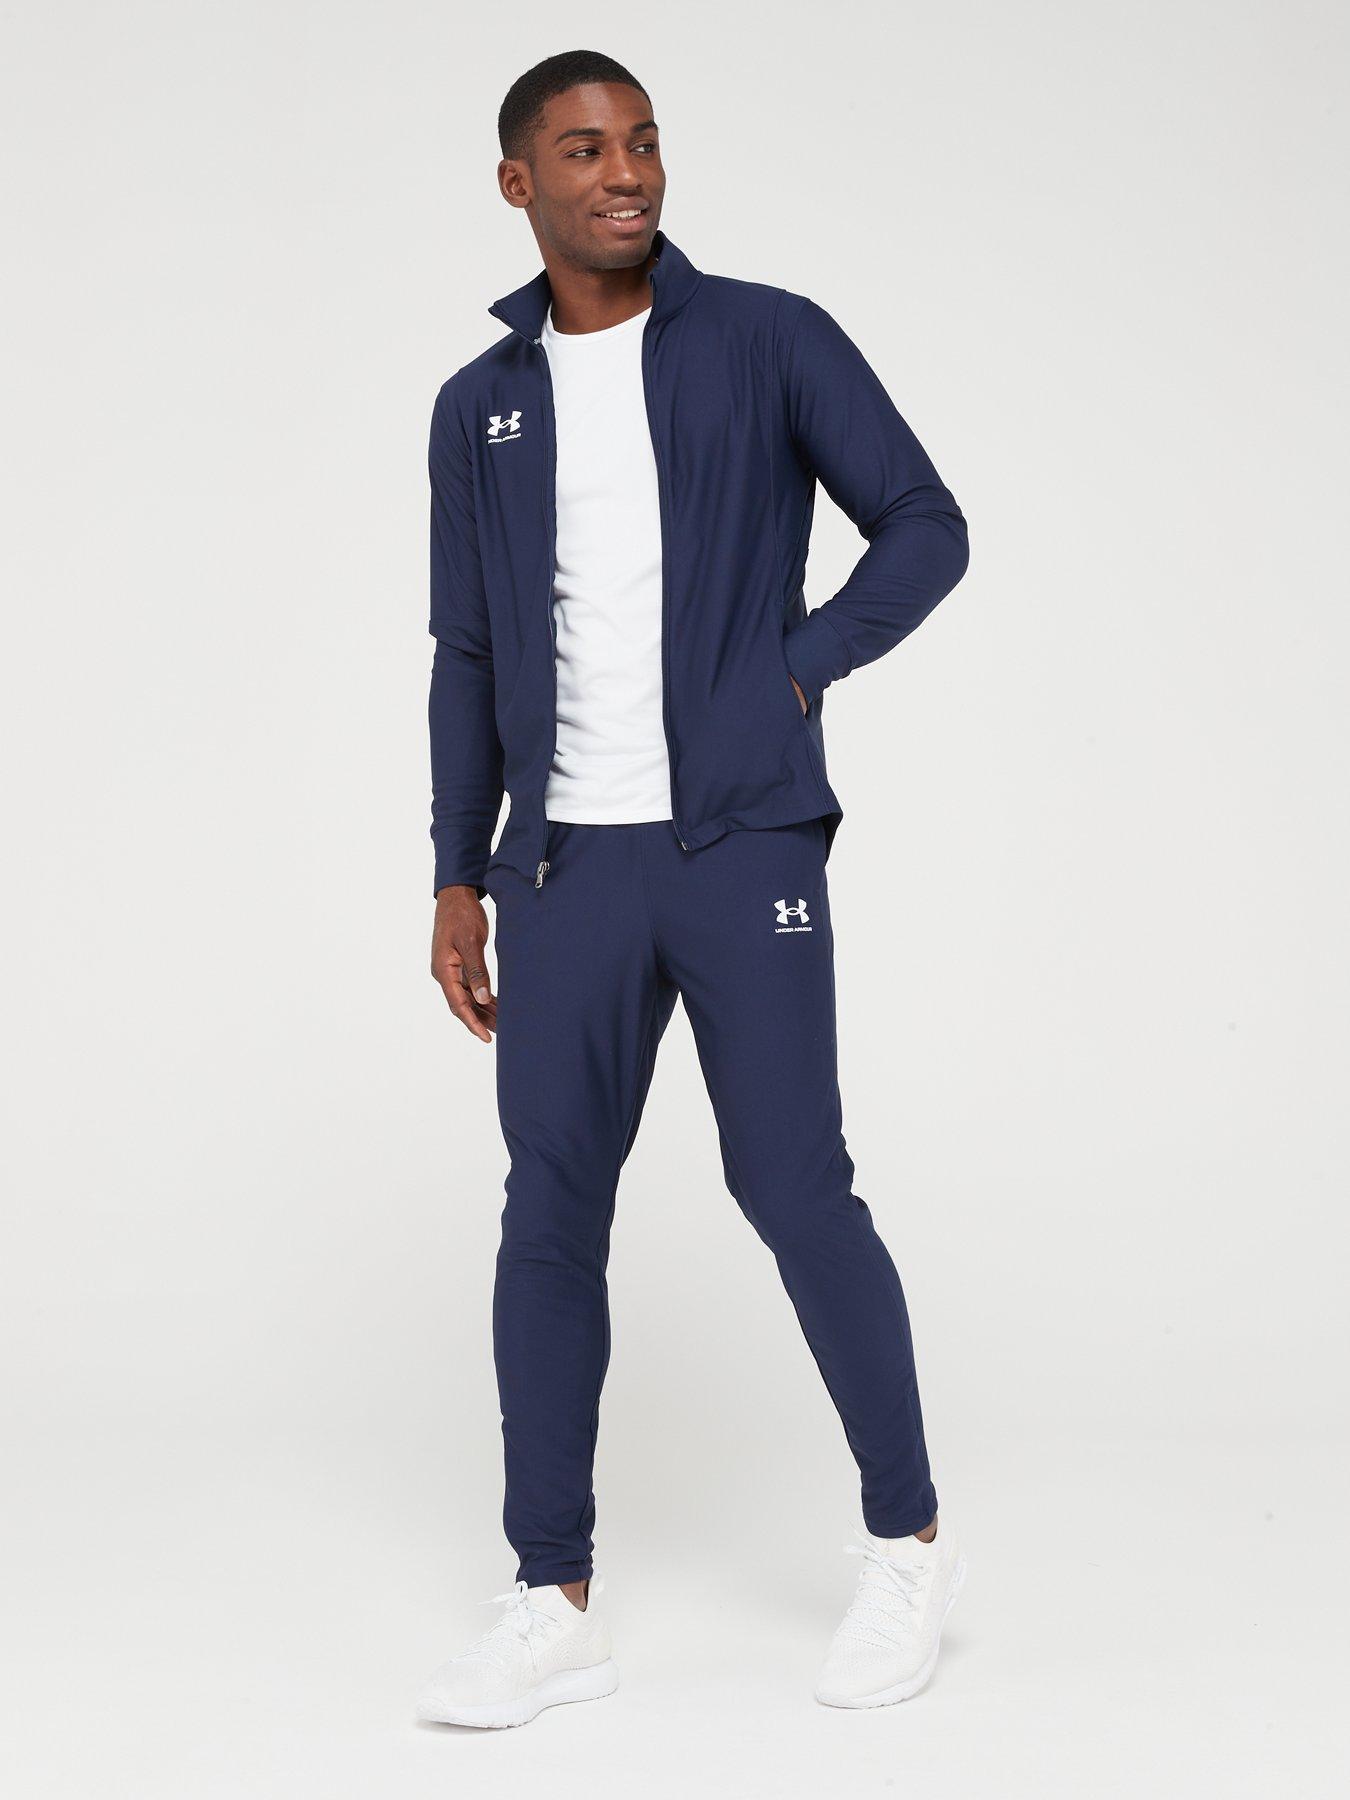 L, Tracksuits, Mens sports clothing, Sports & leisure